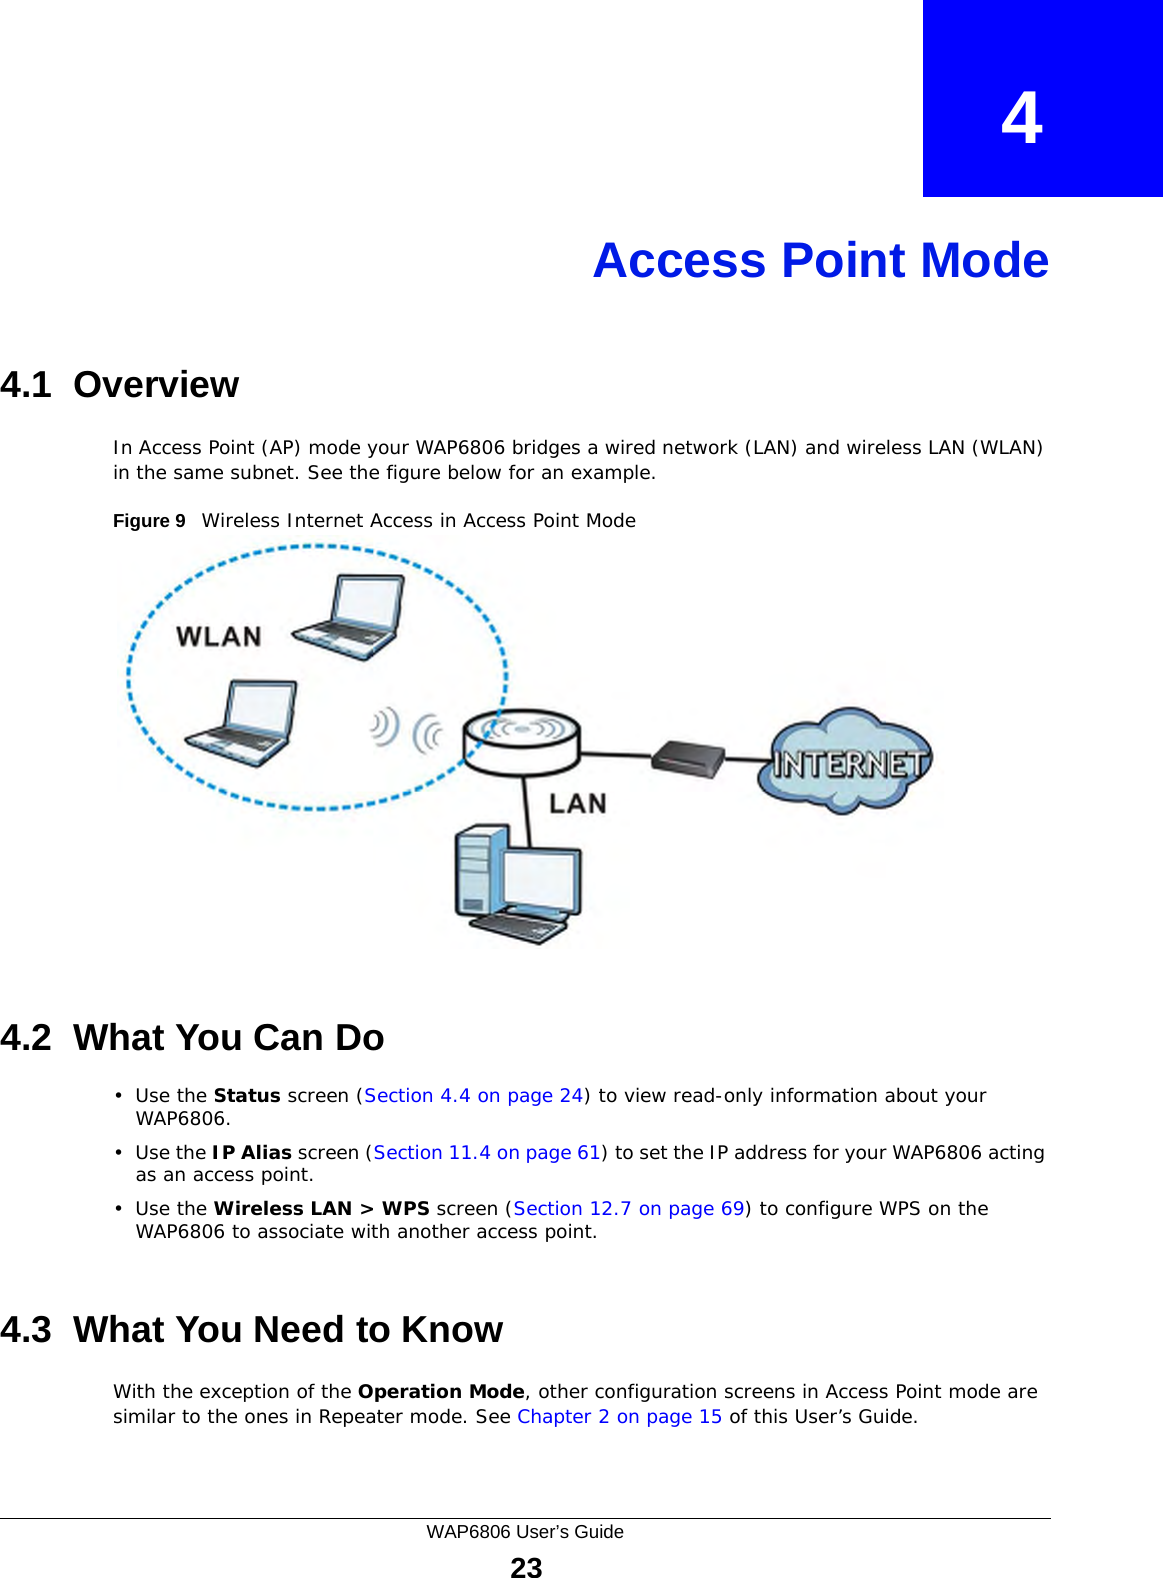 WAP6806 User’s Guide23CHAPTER   4Access Point Mode4.1  OverviewIn Access Point (AP) mode your WAP6806 bridges a wired network (LAN) and wireless LAN (WLAN) in the same subnet. See the figure below for an example.Figure 9   Wireless Internet Access in Access Point Mode 4.2  What You Can Do•Use the Status screen (Section 4.4 on page 24) to view read-only information about your WAP6806.•Use the IP Alias screen (Section 11.4 on page 61) to set the IP address for your WAP6806 acting as an access point.•Use the Wireless LAN &gt; WPS screen (Section 12.7 on page 69) to configure WPS on the WAP6806 to associate with another access point. 4.3  What You Need to KnowWith the exception of the Operation Mode, other configuration screens in Access Point mode are similar to the ones in Repeater mode. See Chapter 2 on page 15 of this User’s Guide.